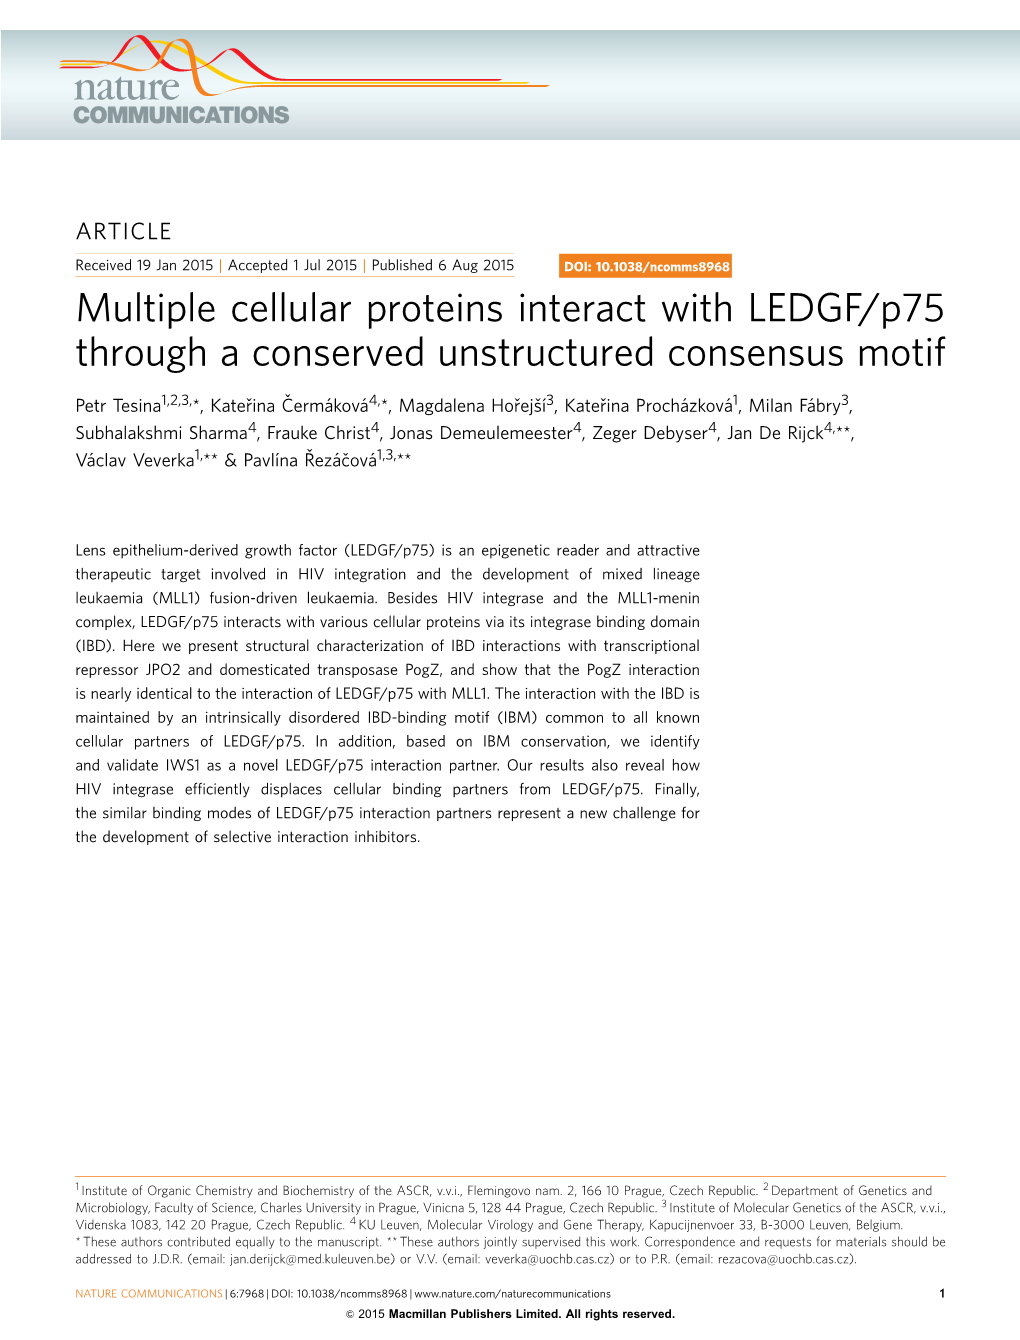 Multiple Cellular Proteins Interact with LEDGF/P75 Through a Conserved Unstructured Consensus Motif